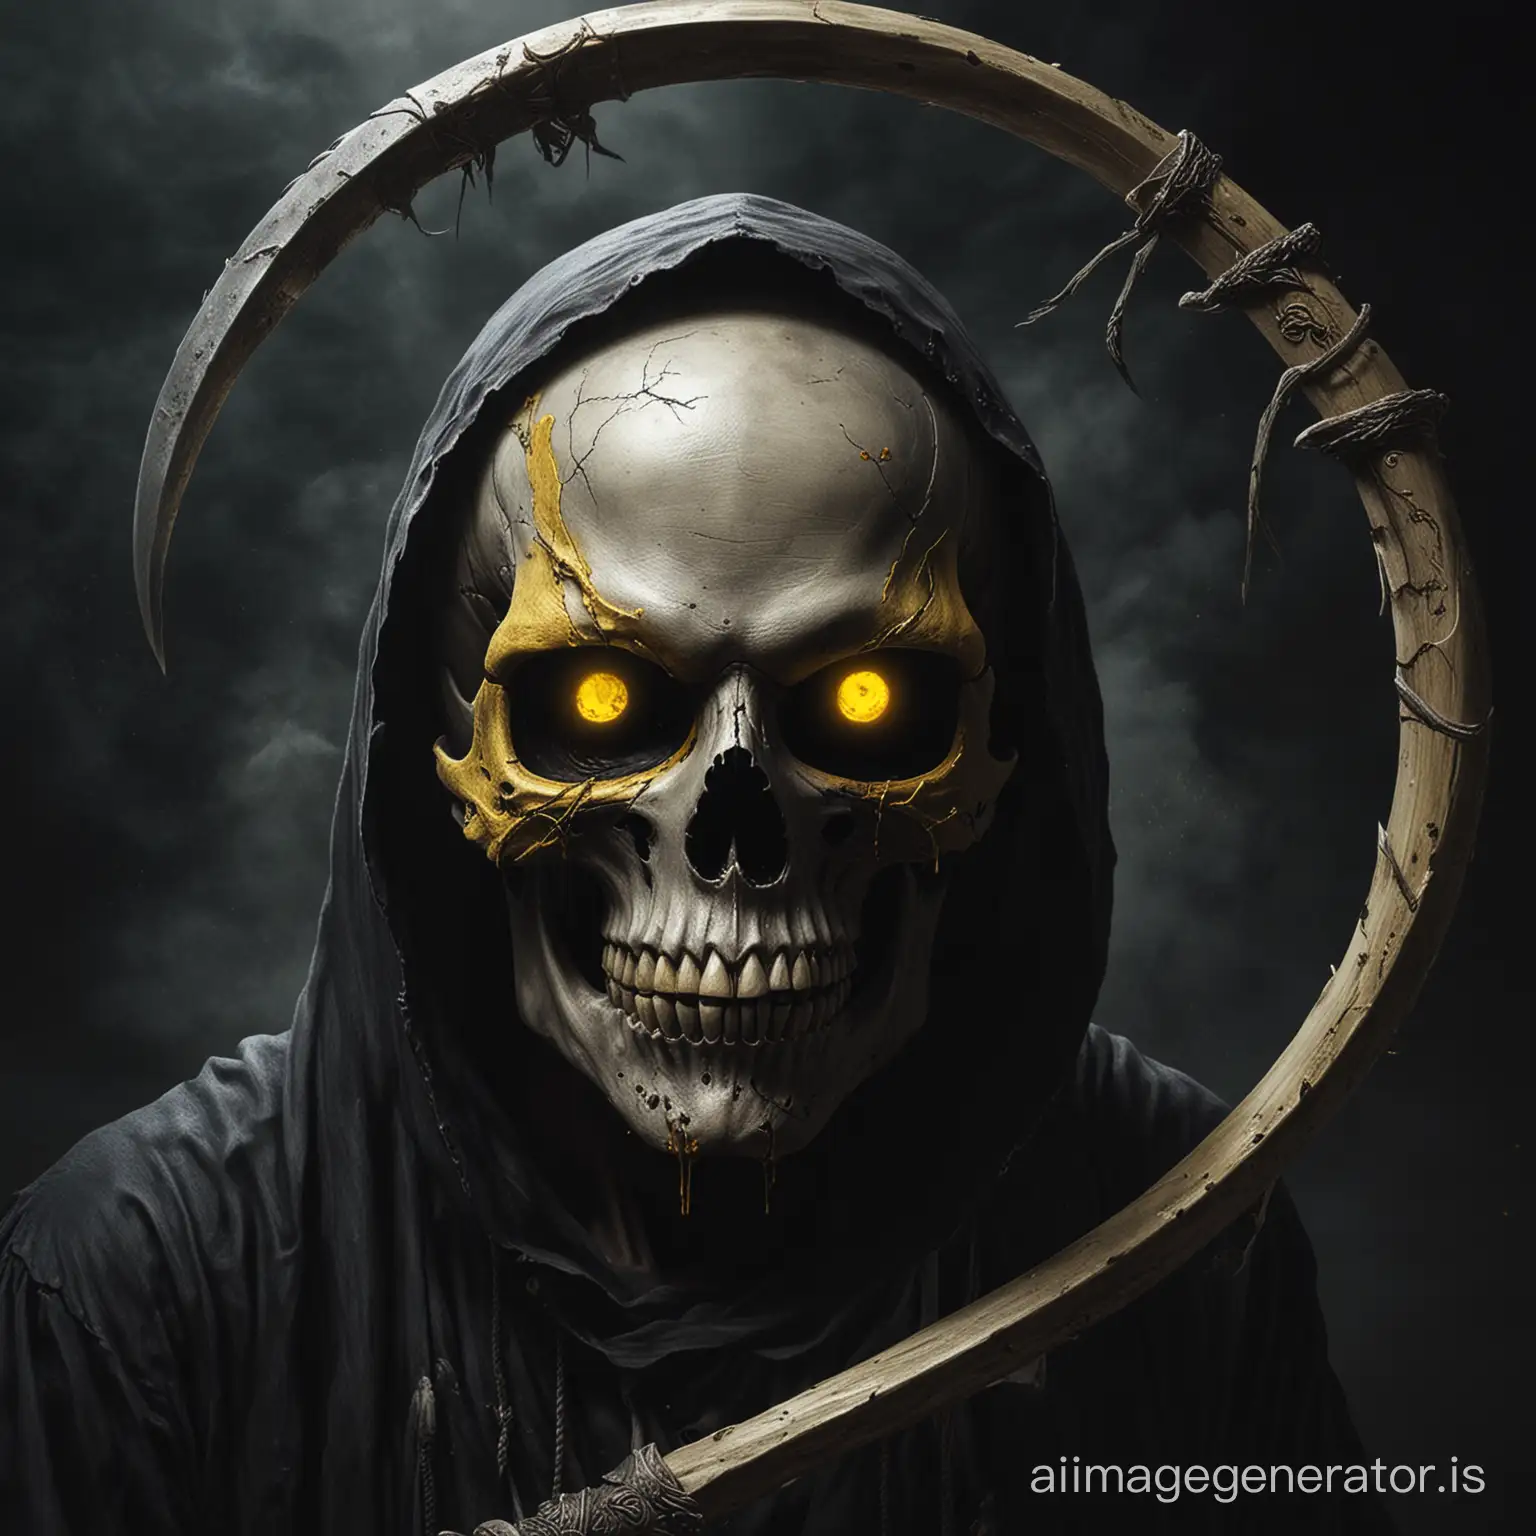 image of death , dark background , a skull with yellow eyes and a scythe